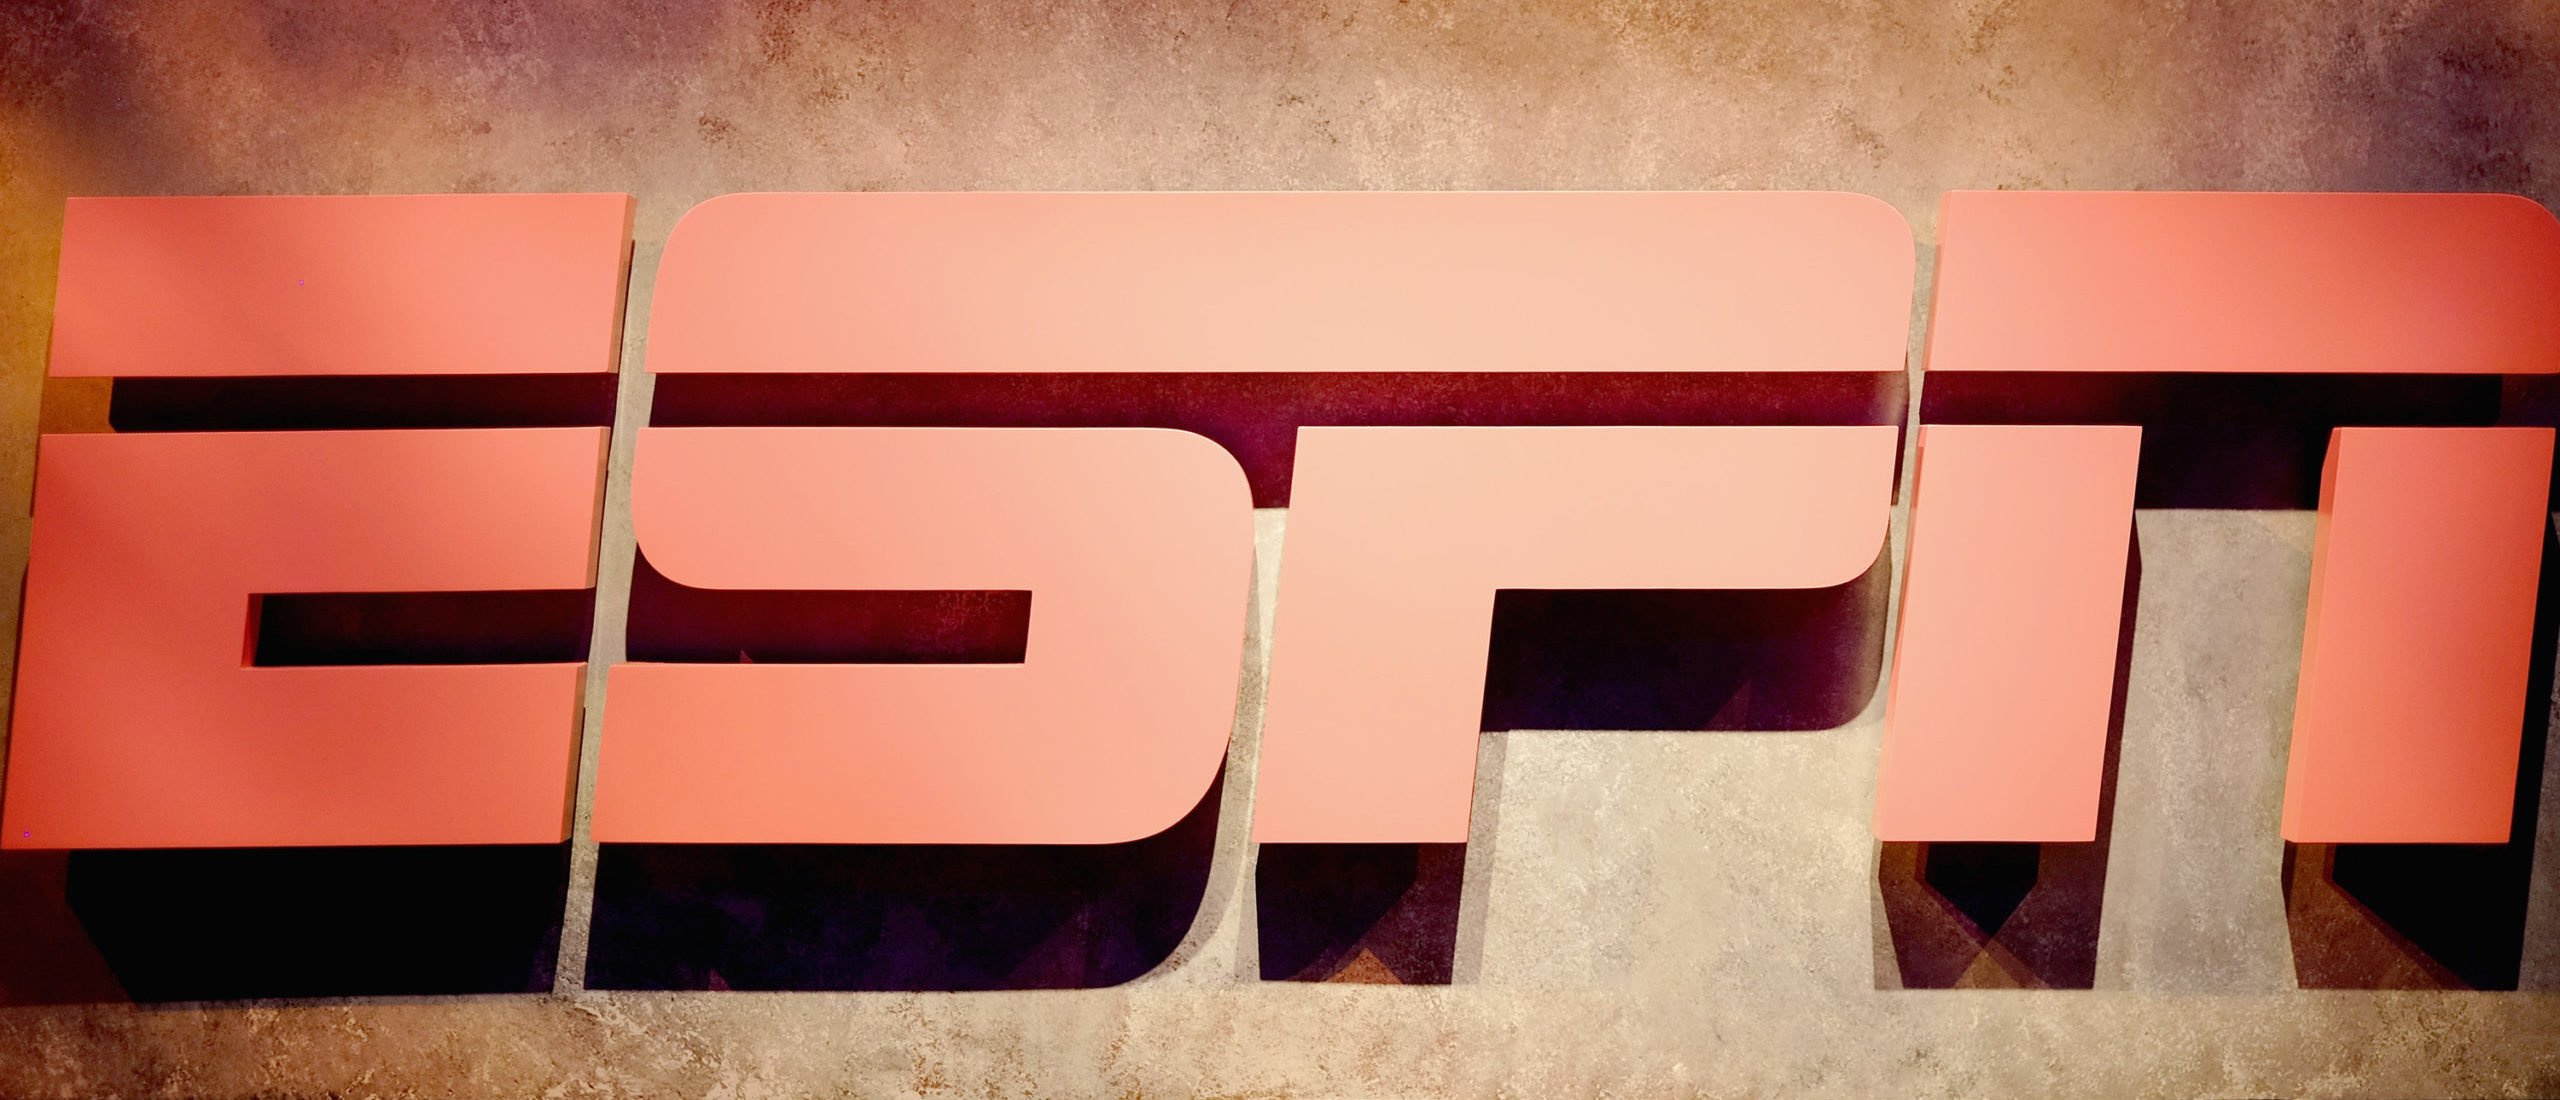 REPORT: ESPN Layoffs Are Looming, And Apparently No One’s Job Is Safe